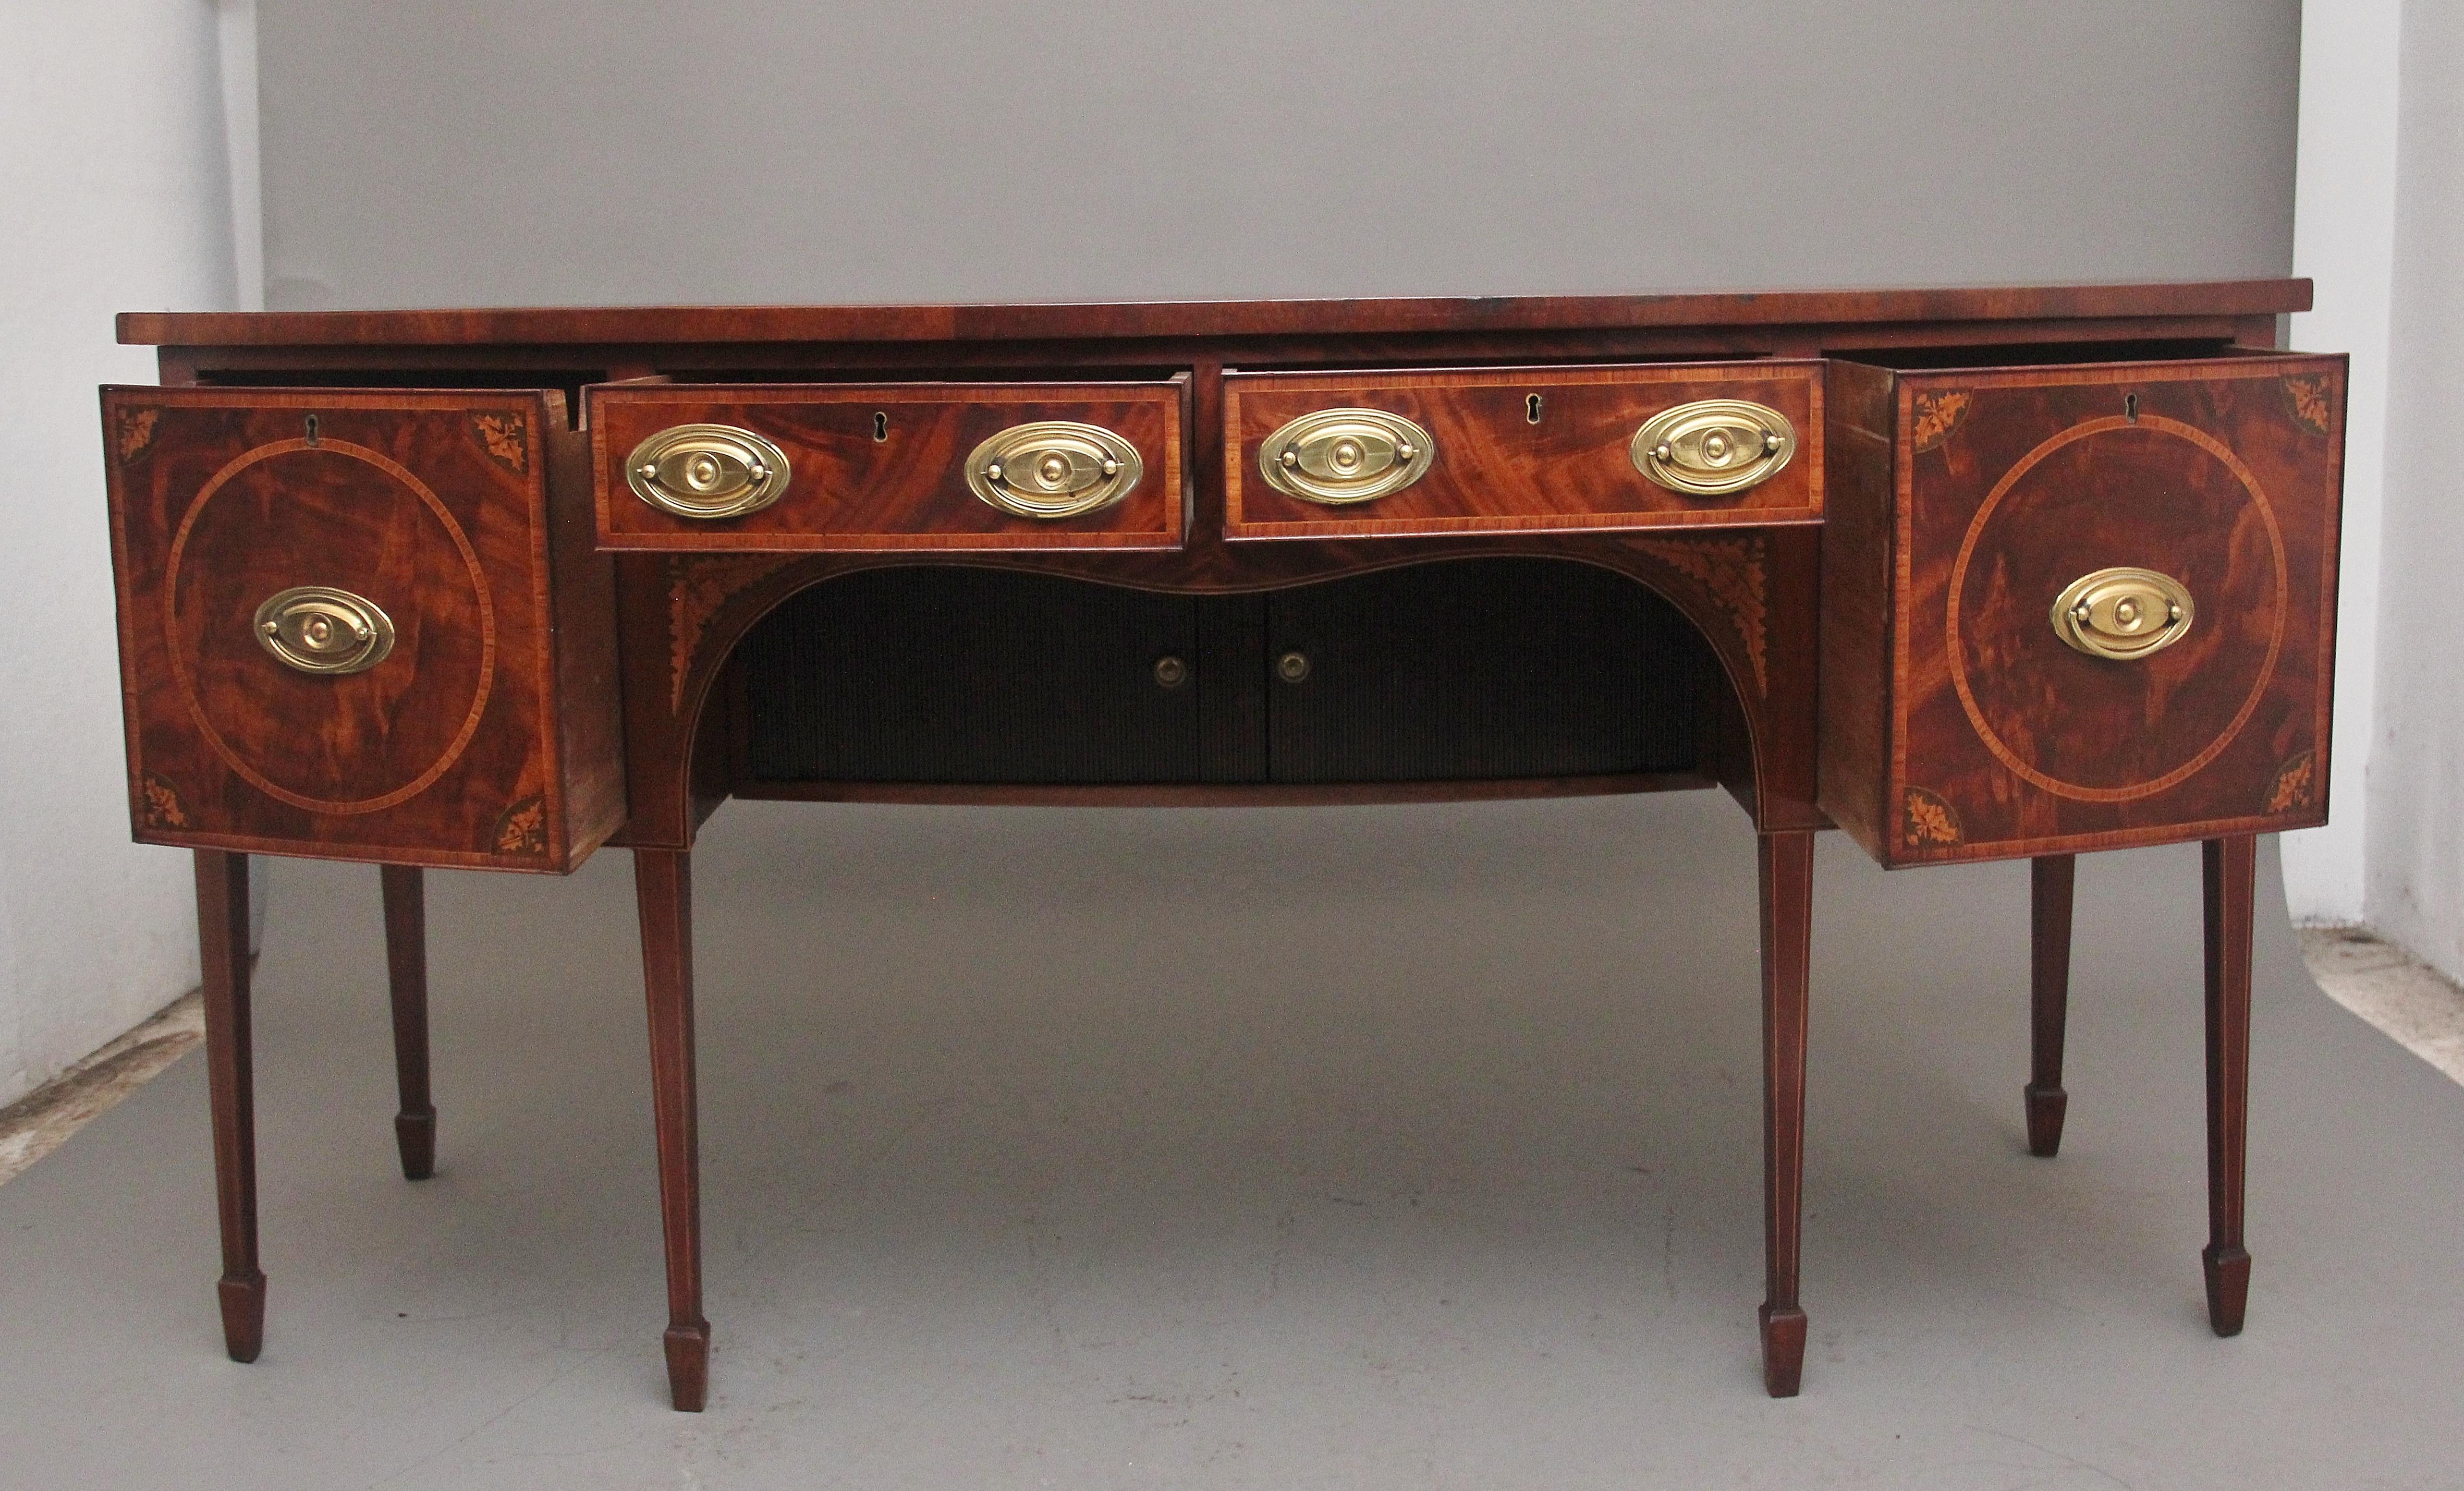 A lovely quality early 19th Century inlaid mahogany bowfront sideboard, having a lovely figured top with crossbanding around the edge, below the top there are two central drawers and two deep drawers either side, all drawers are oak lined and having